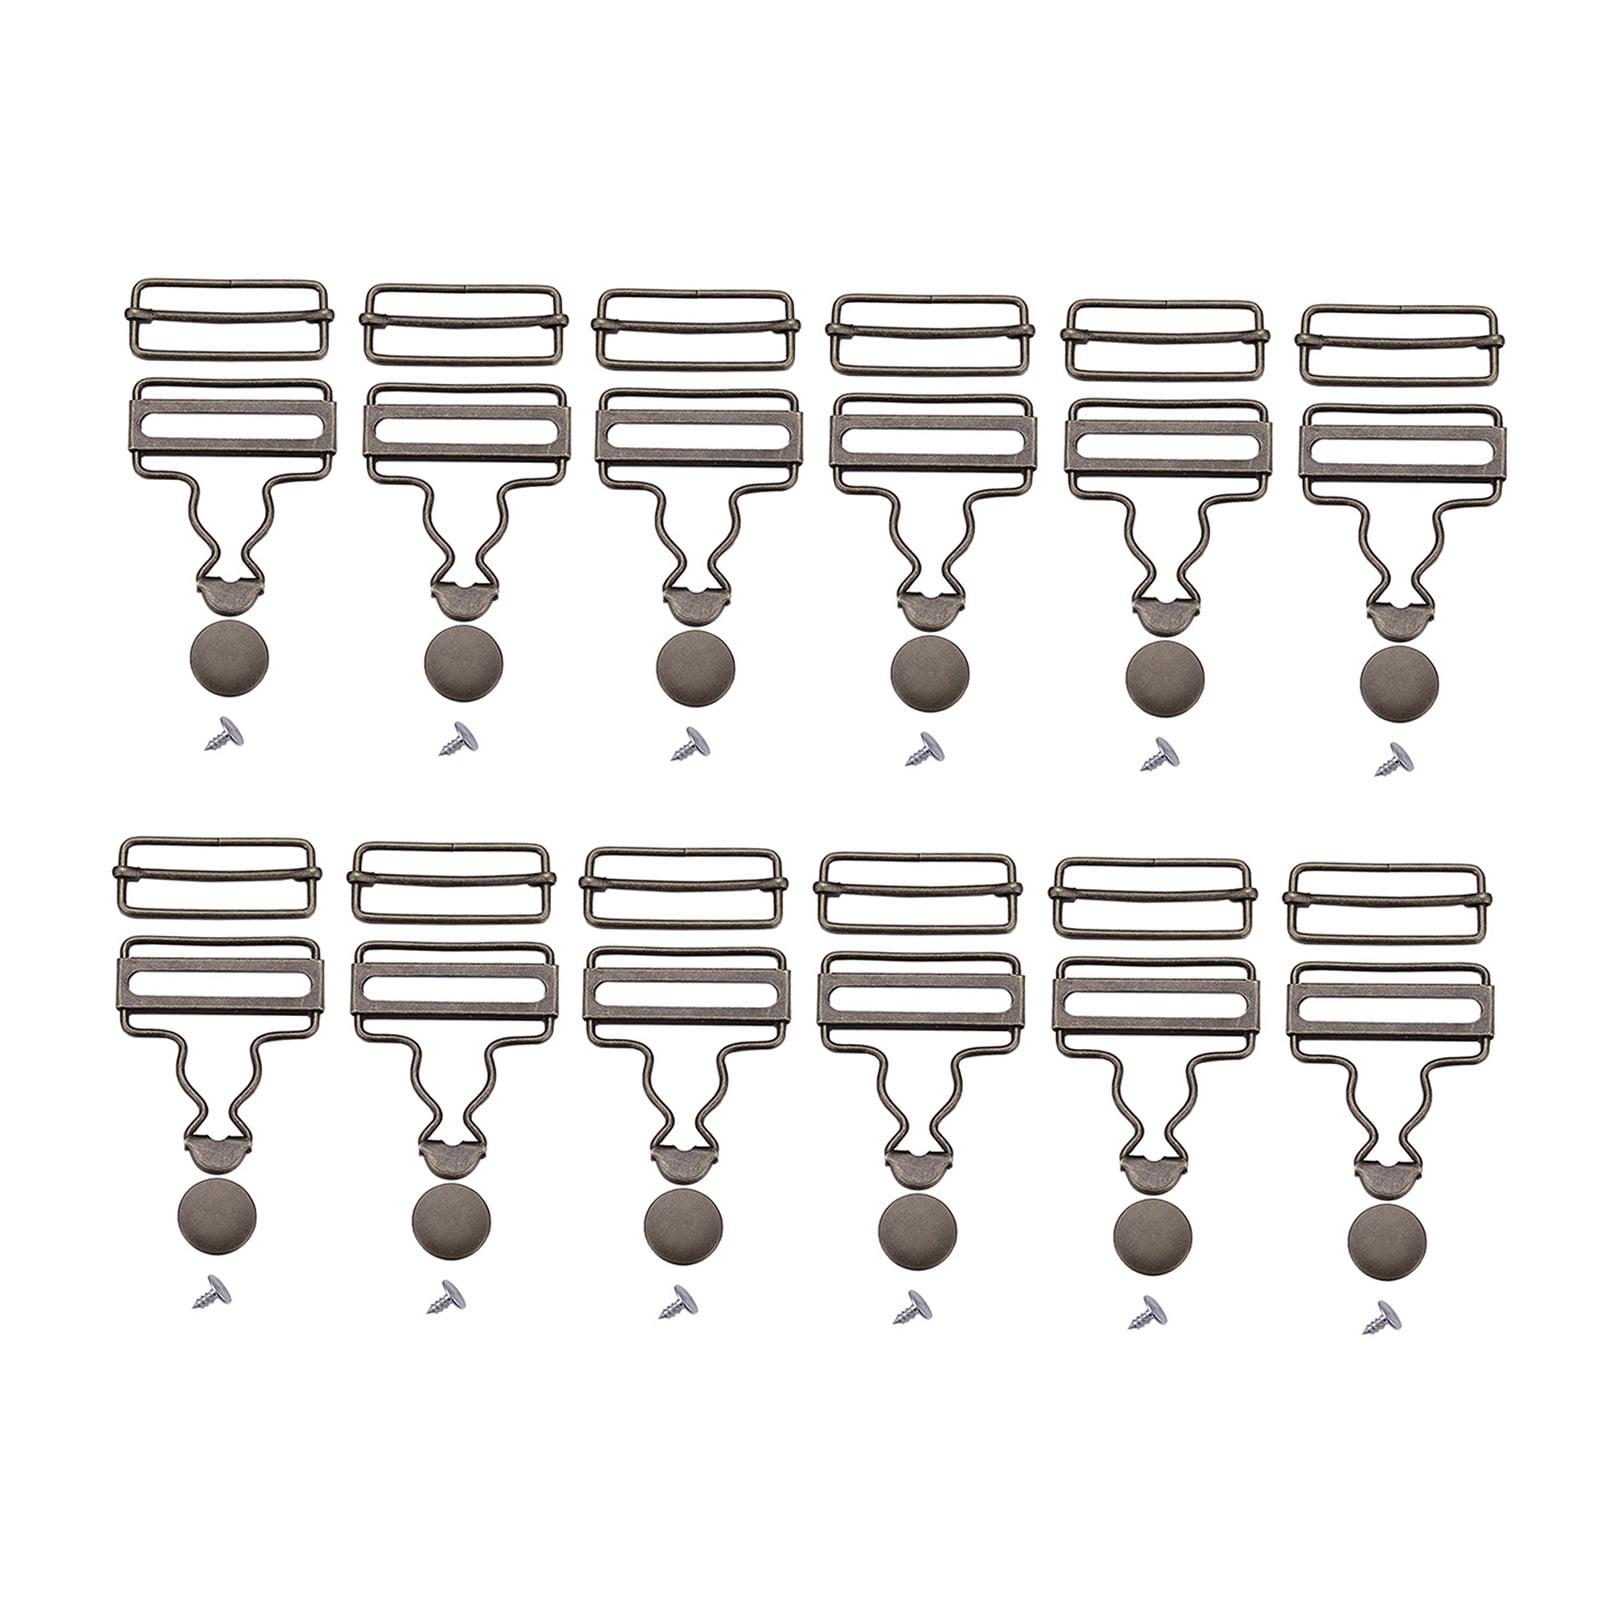 15 Sets Dungaree Buckles Dungaree Clips Metal Dungaree Buckles for Sewing Fasteners Clips with Rectangle Buckles Rectangle Slider Fasteners for Suspender,Straps,Dungarees,Hand Bags,Jackets,Overalls